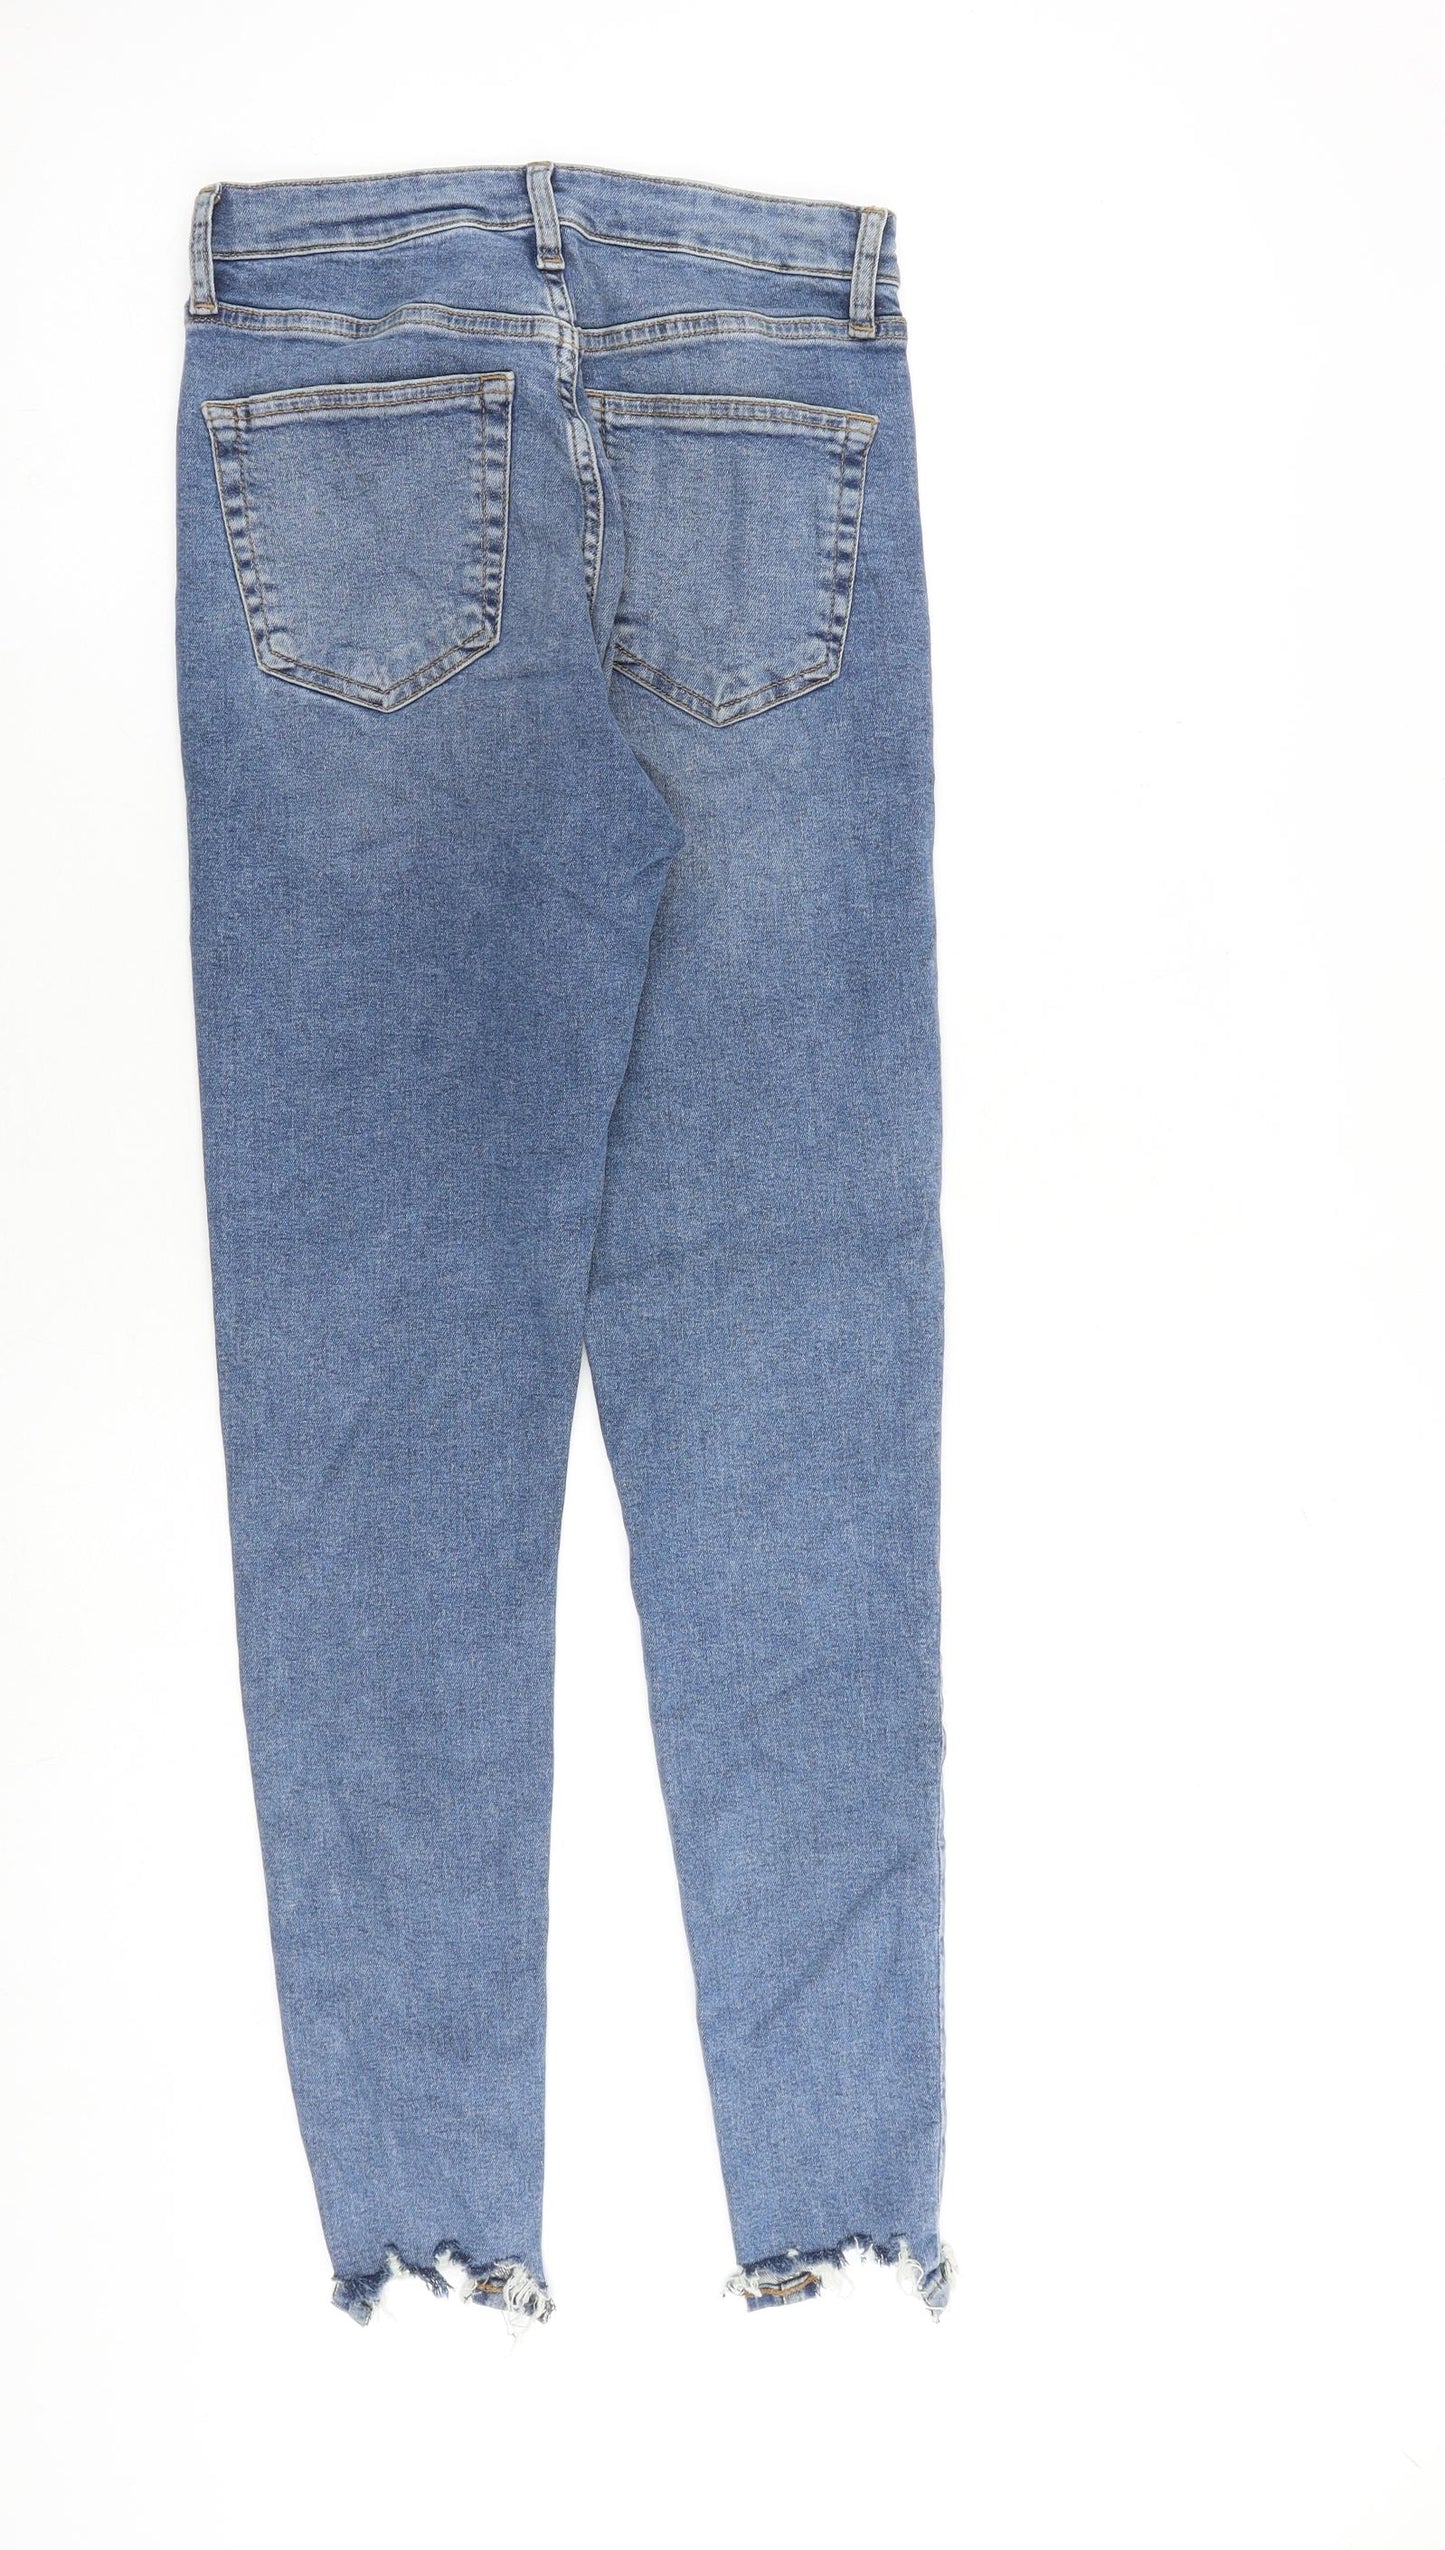 Topshop Womens Blue Cotton Skinny Jeans Size 28 in L32 in Regular Zip - Distressed Hems